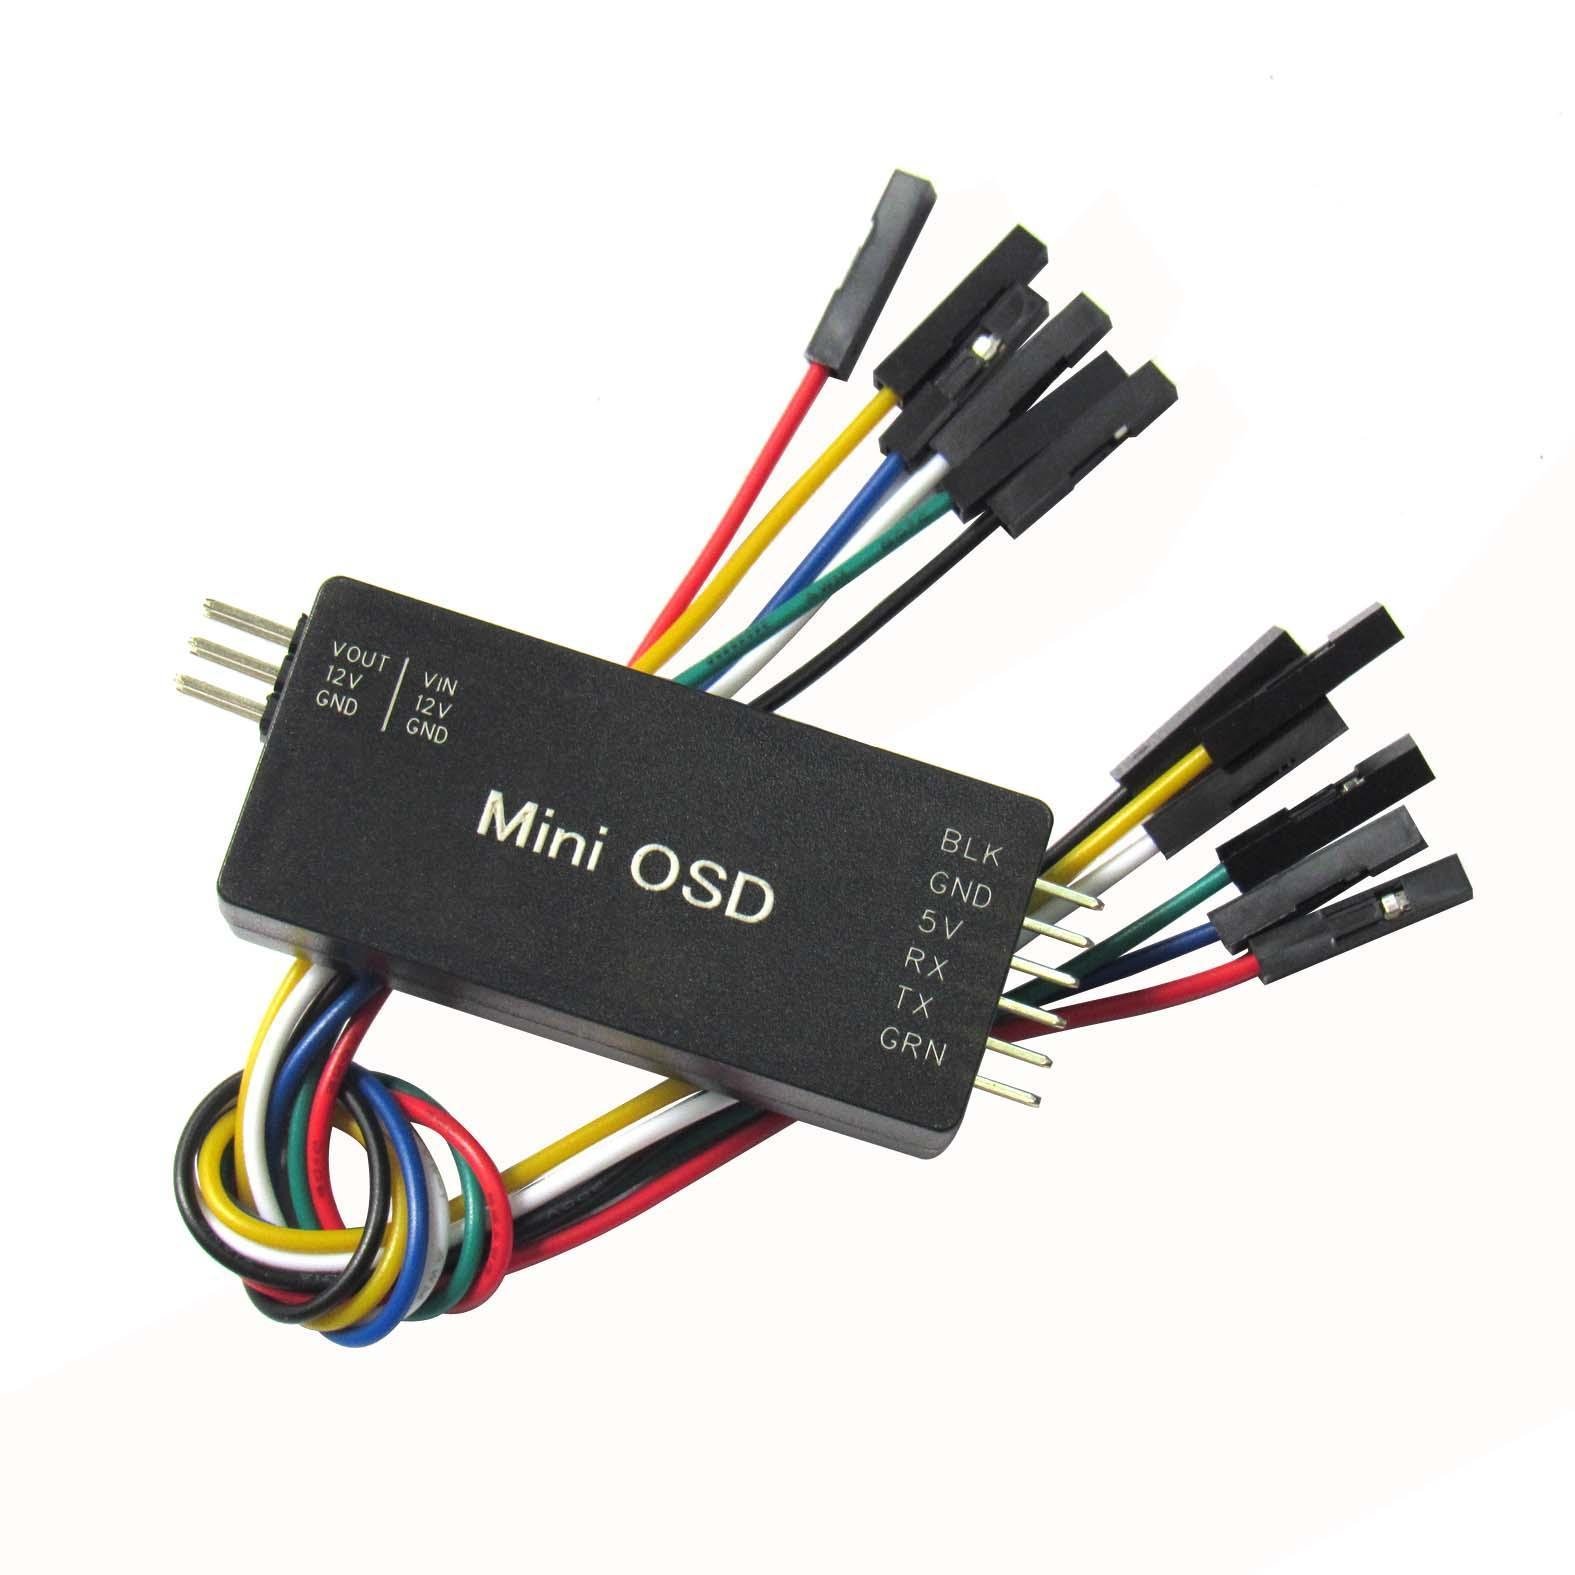 Share Goo Mini OSD Module On Screen Display Video Record for RC APM APM2.8 Pixhawk PX4 Flight Controller Airplanes with Battery Strap